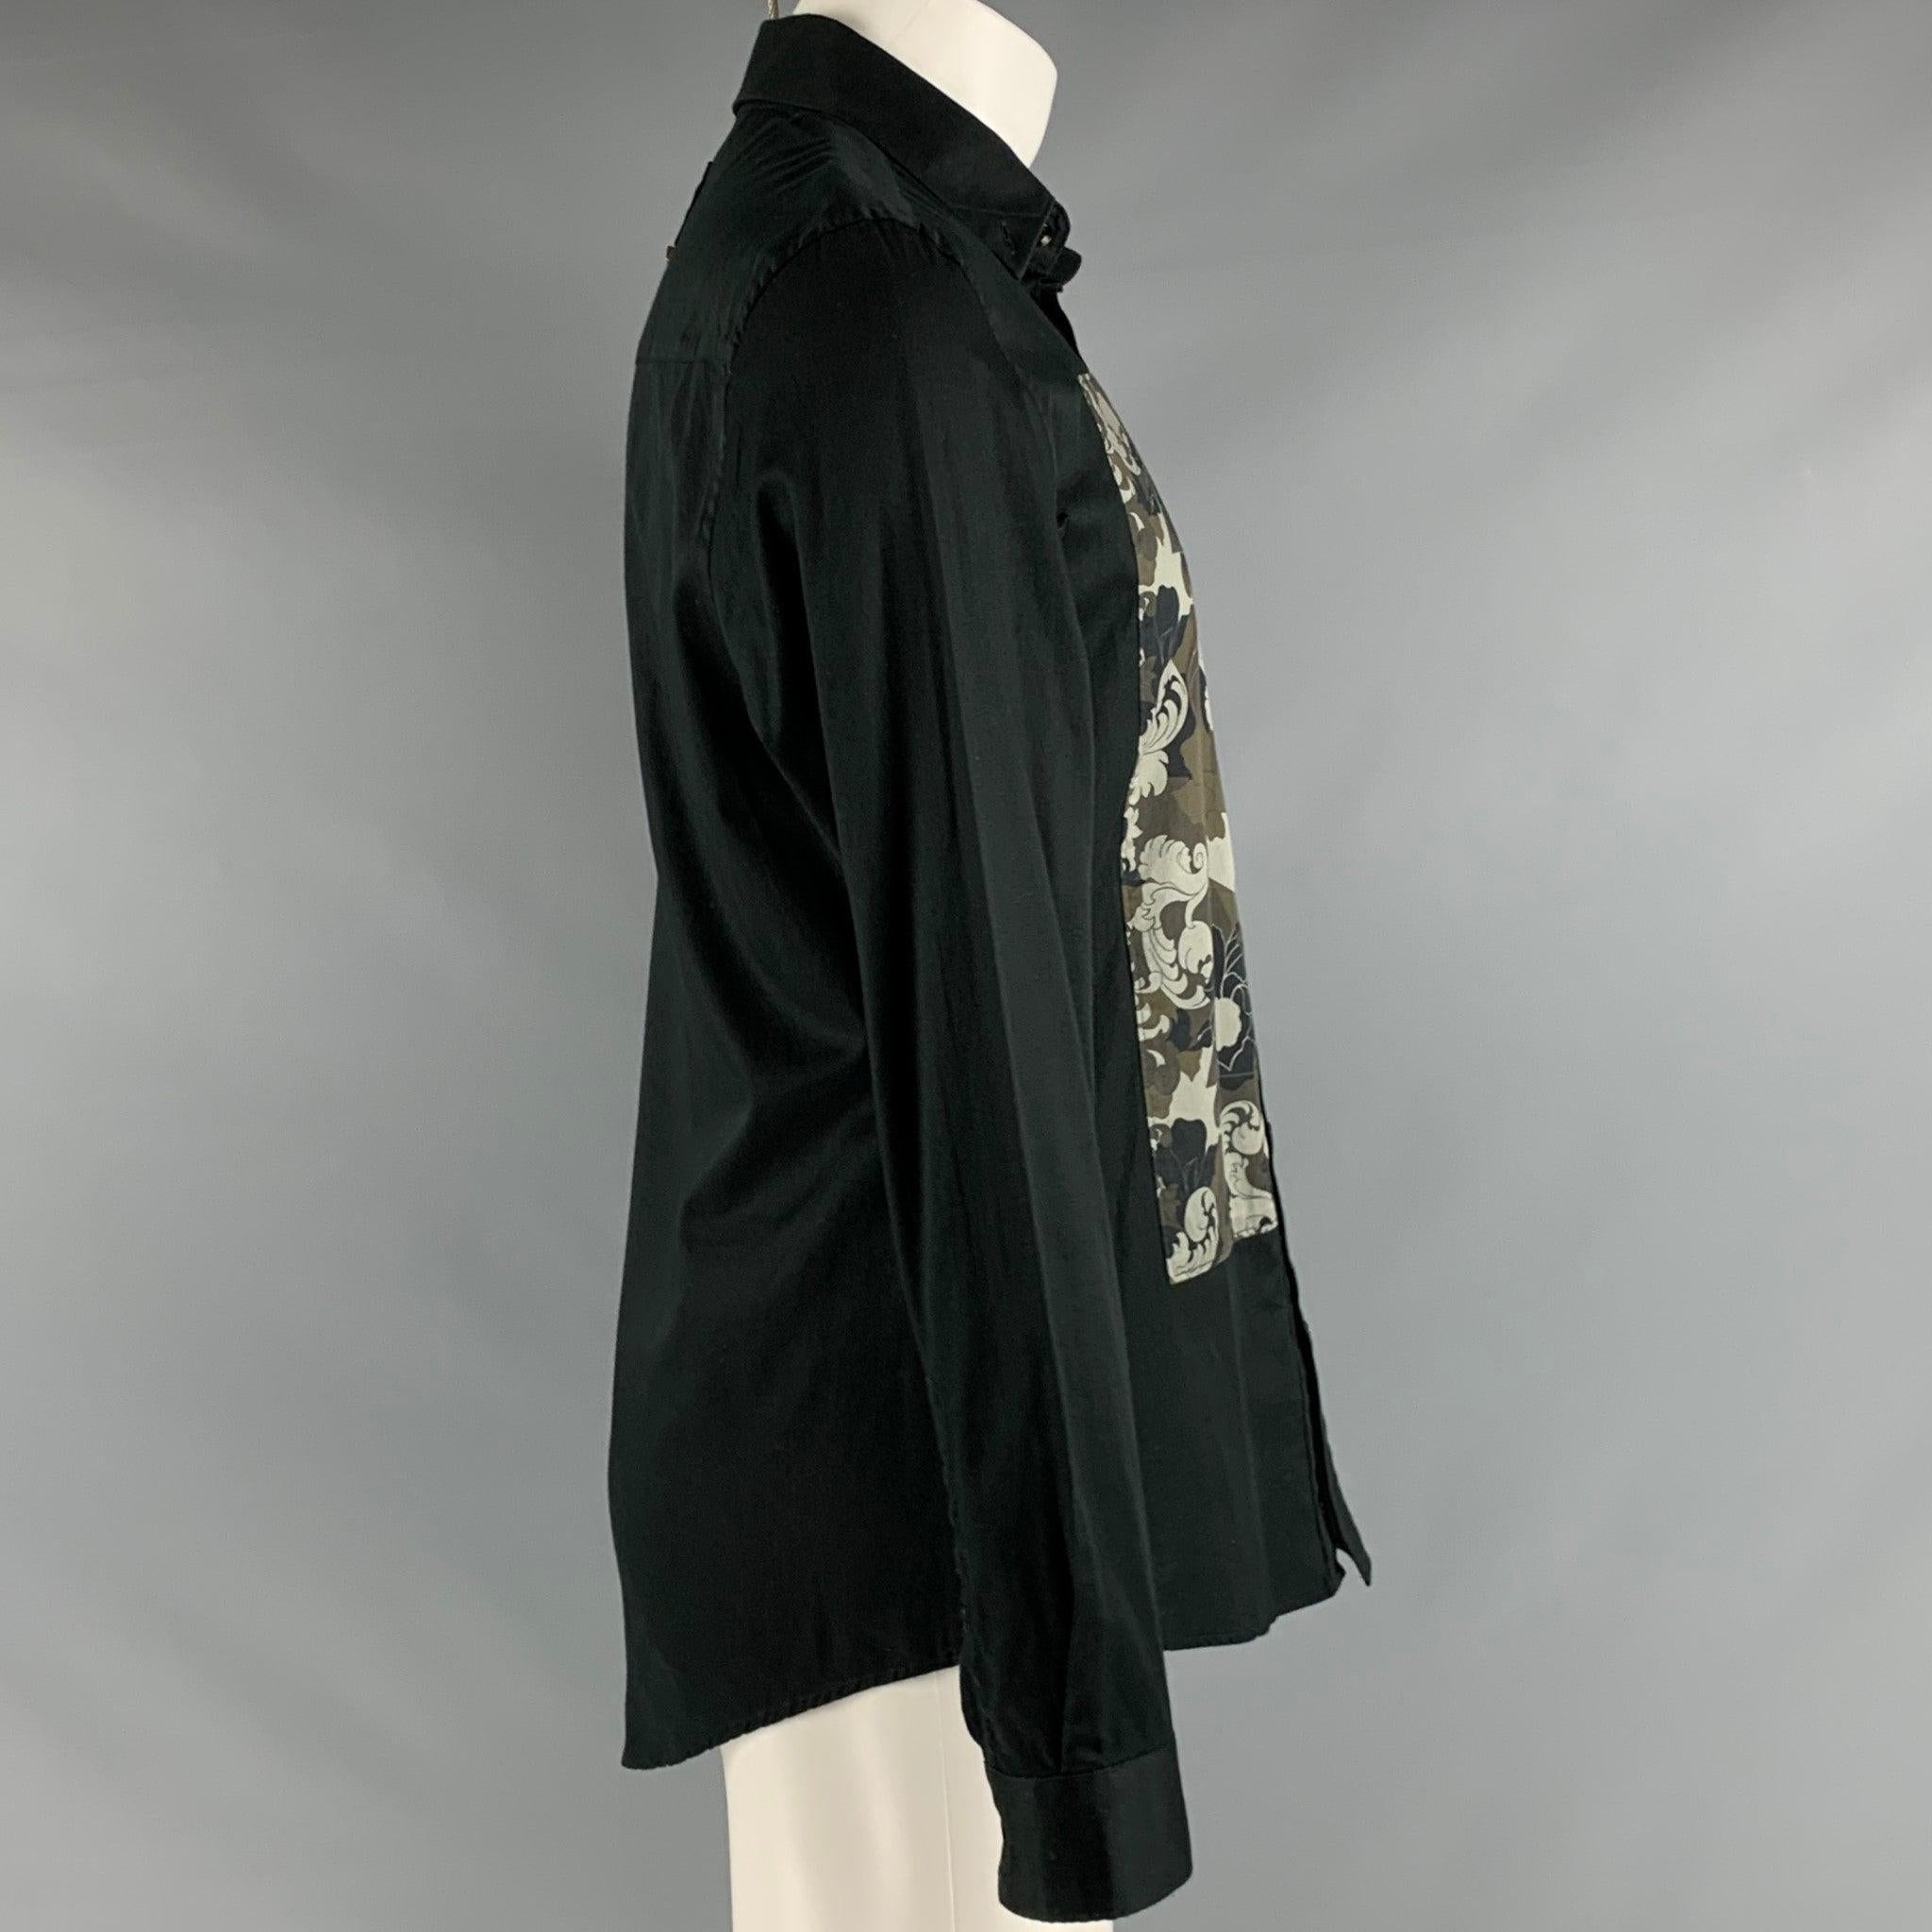 VERSACE COLLECTION long sleeve shirt
in a black fabric featuring brown abstract floral panels, one pocket, and a button closure.
Good Pre-Owned Condition. Minor signs of wear, tear near right shoulder has been repaired. As is.

Marked:   40